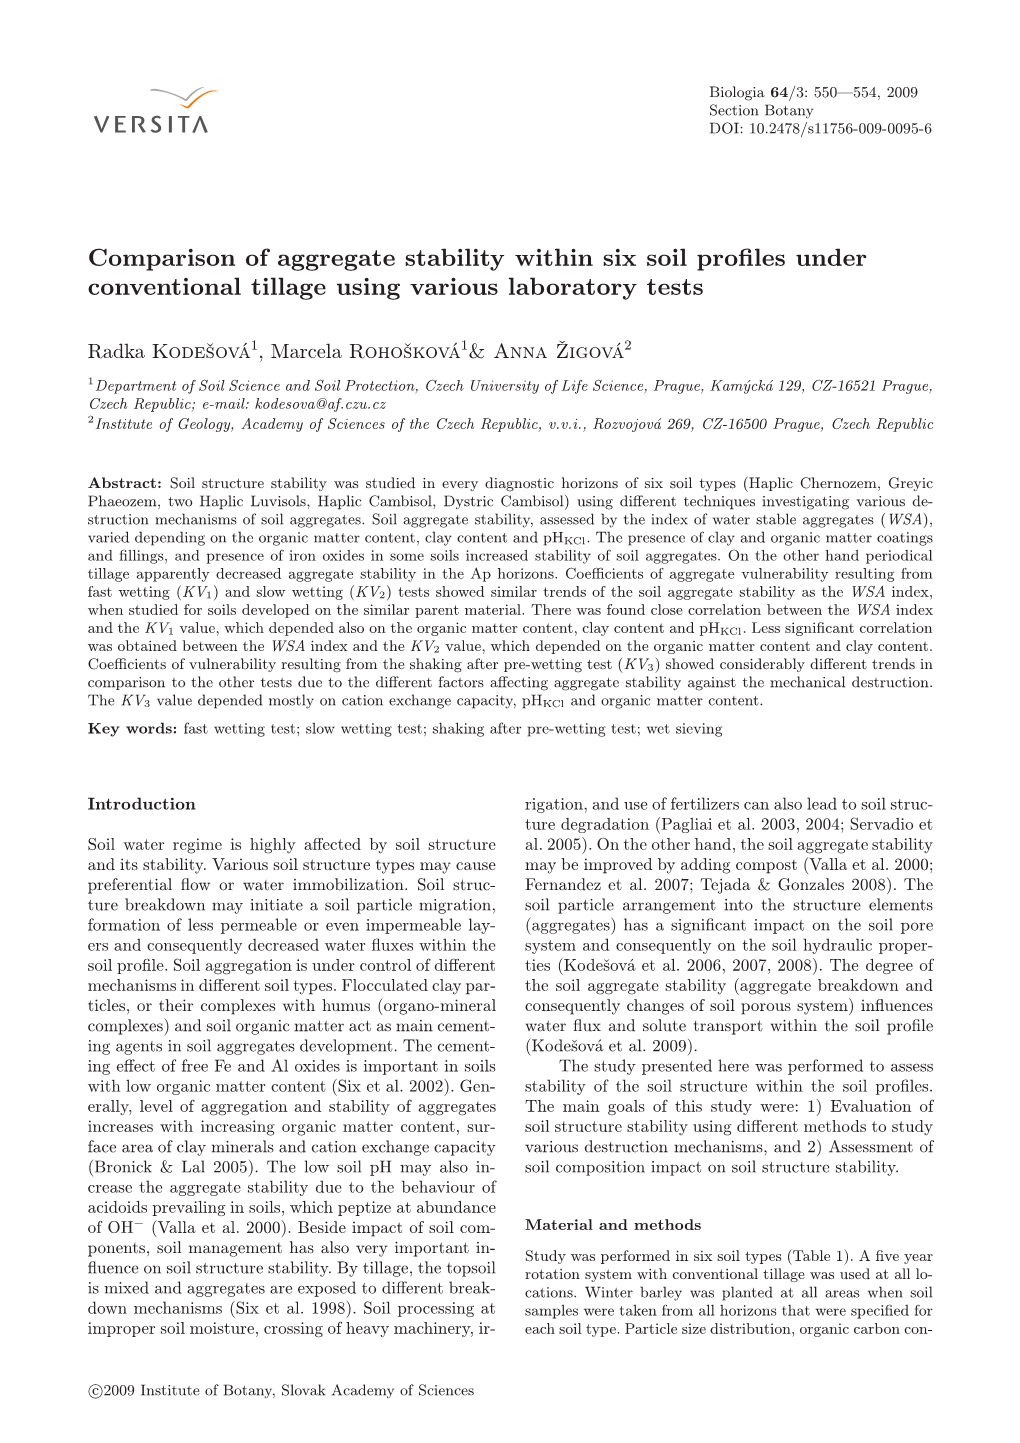 Comparison of Aggregate Stability Within Six Soil Profiles Under